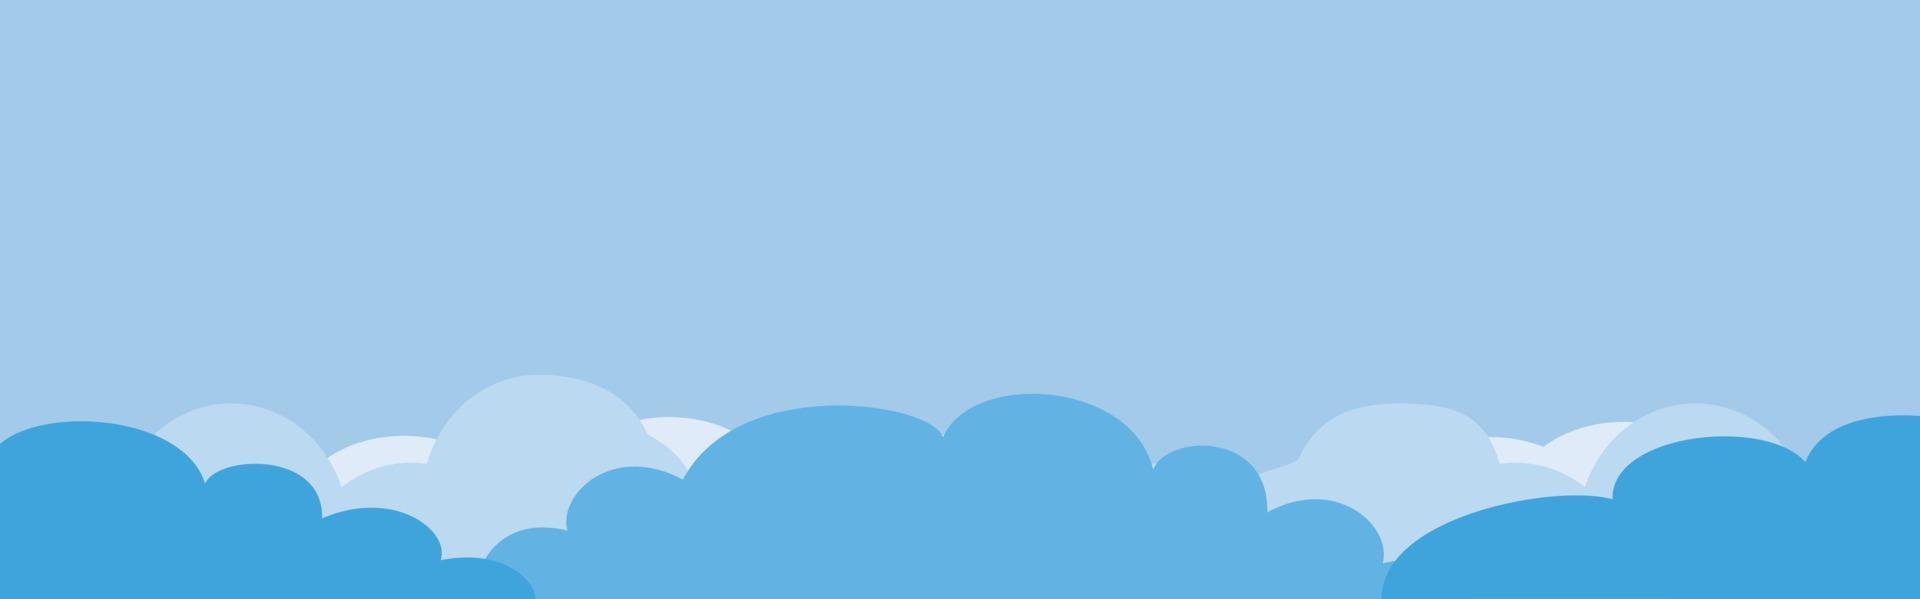 Clouds on blue sky. Cloud with white blue sky background. Border of clouds. Sky with clouds cartoon design vector